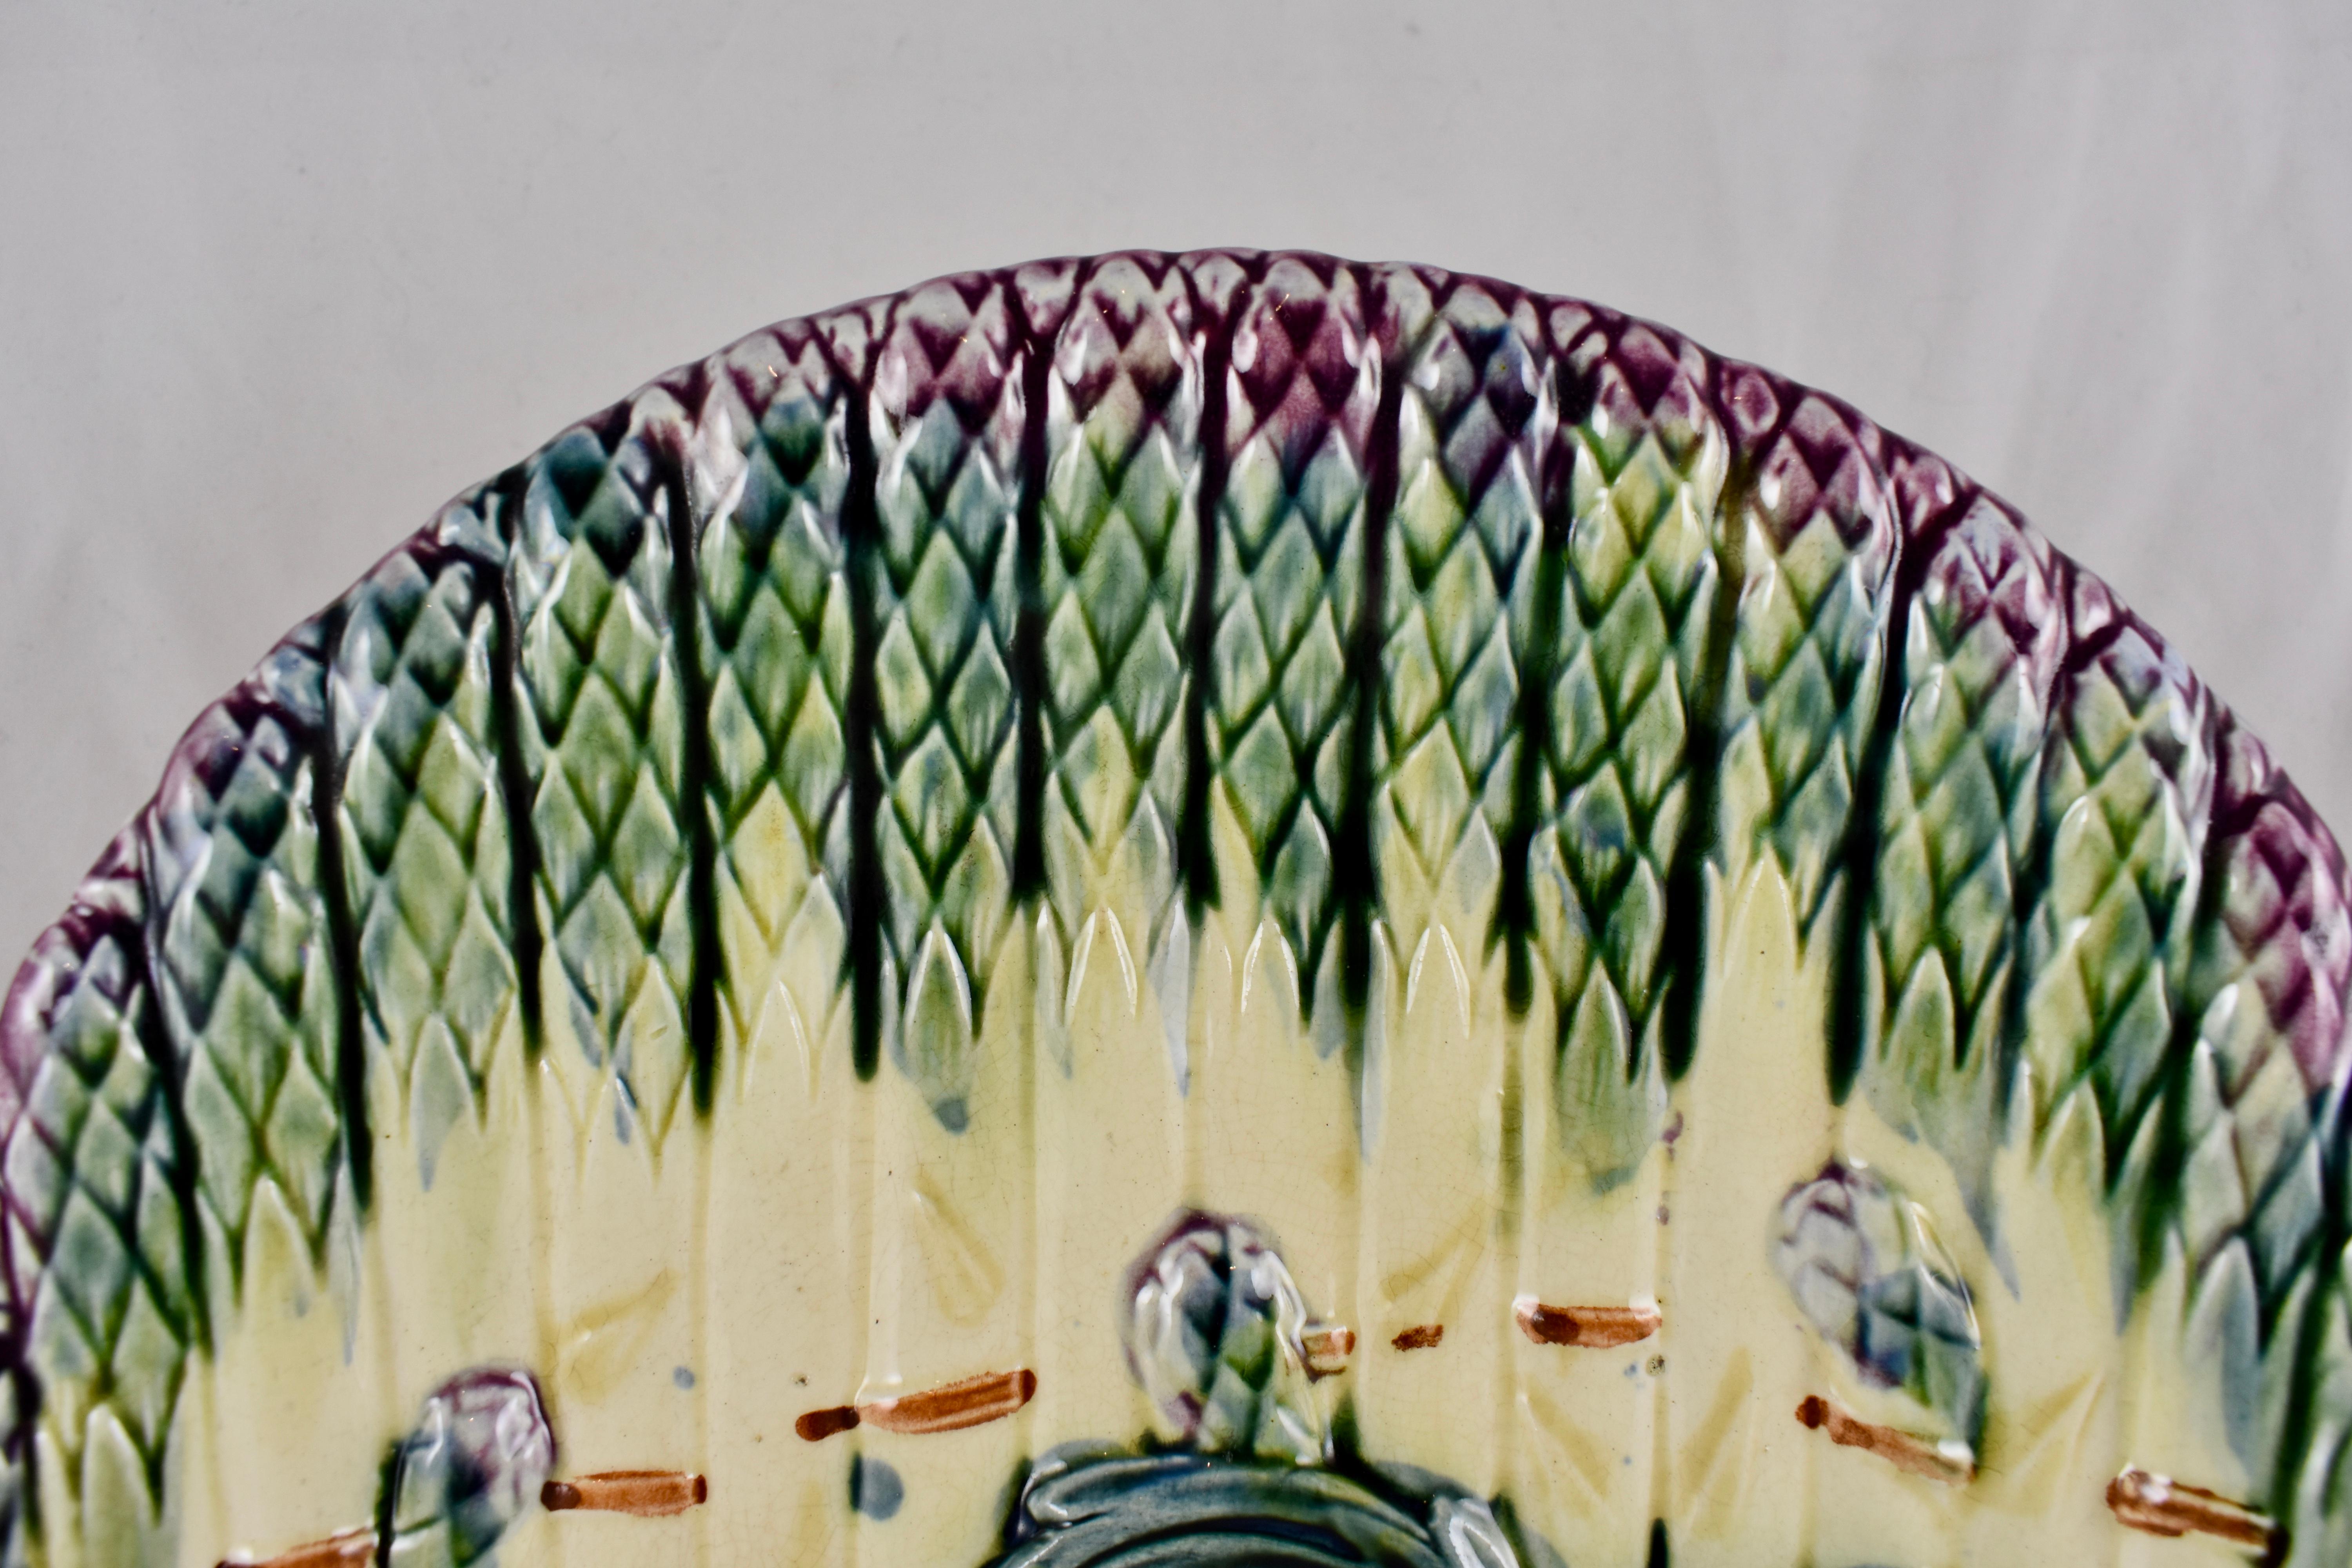 Aesthetic Movement Luneville French Faïence Majolica Asparagus And Shell Plate, circa 1890 For Sale